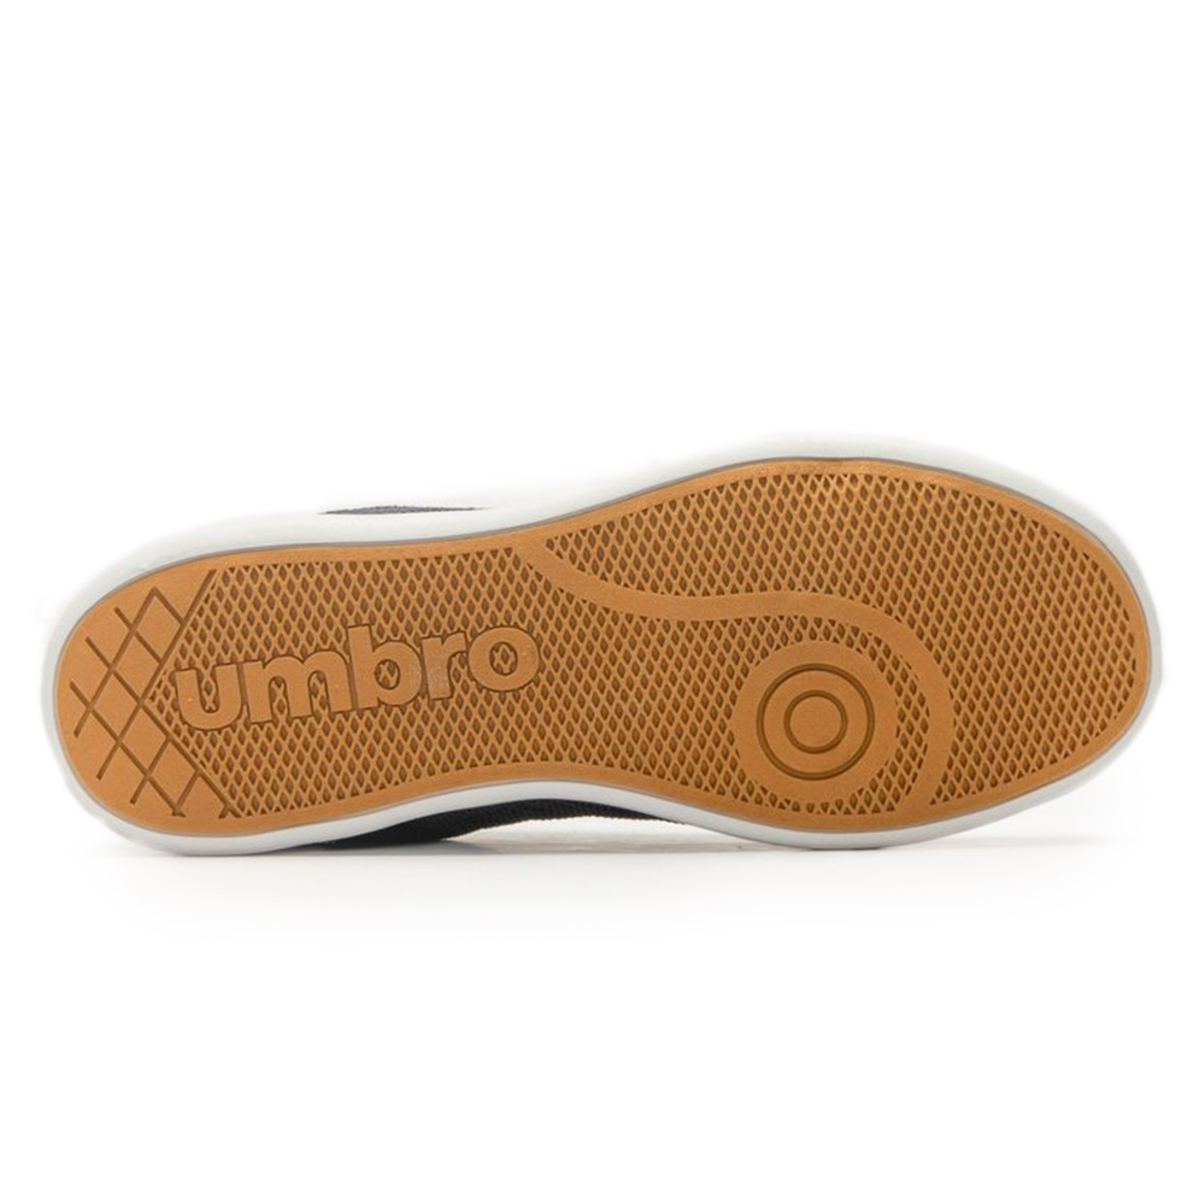 Zapatillas Umbro Speciali Hup,  image number null